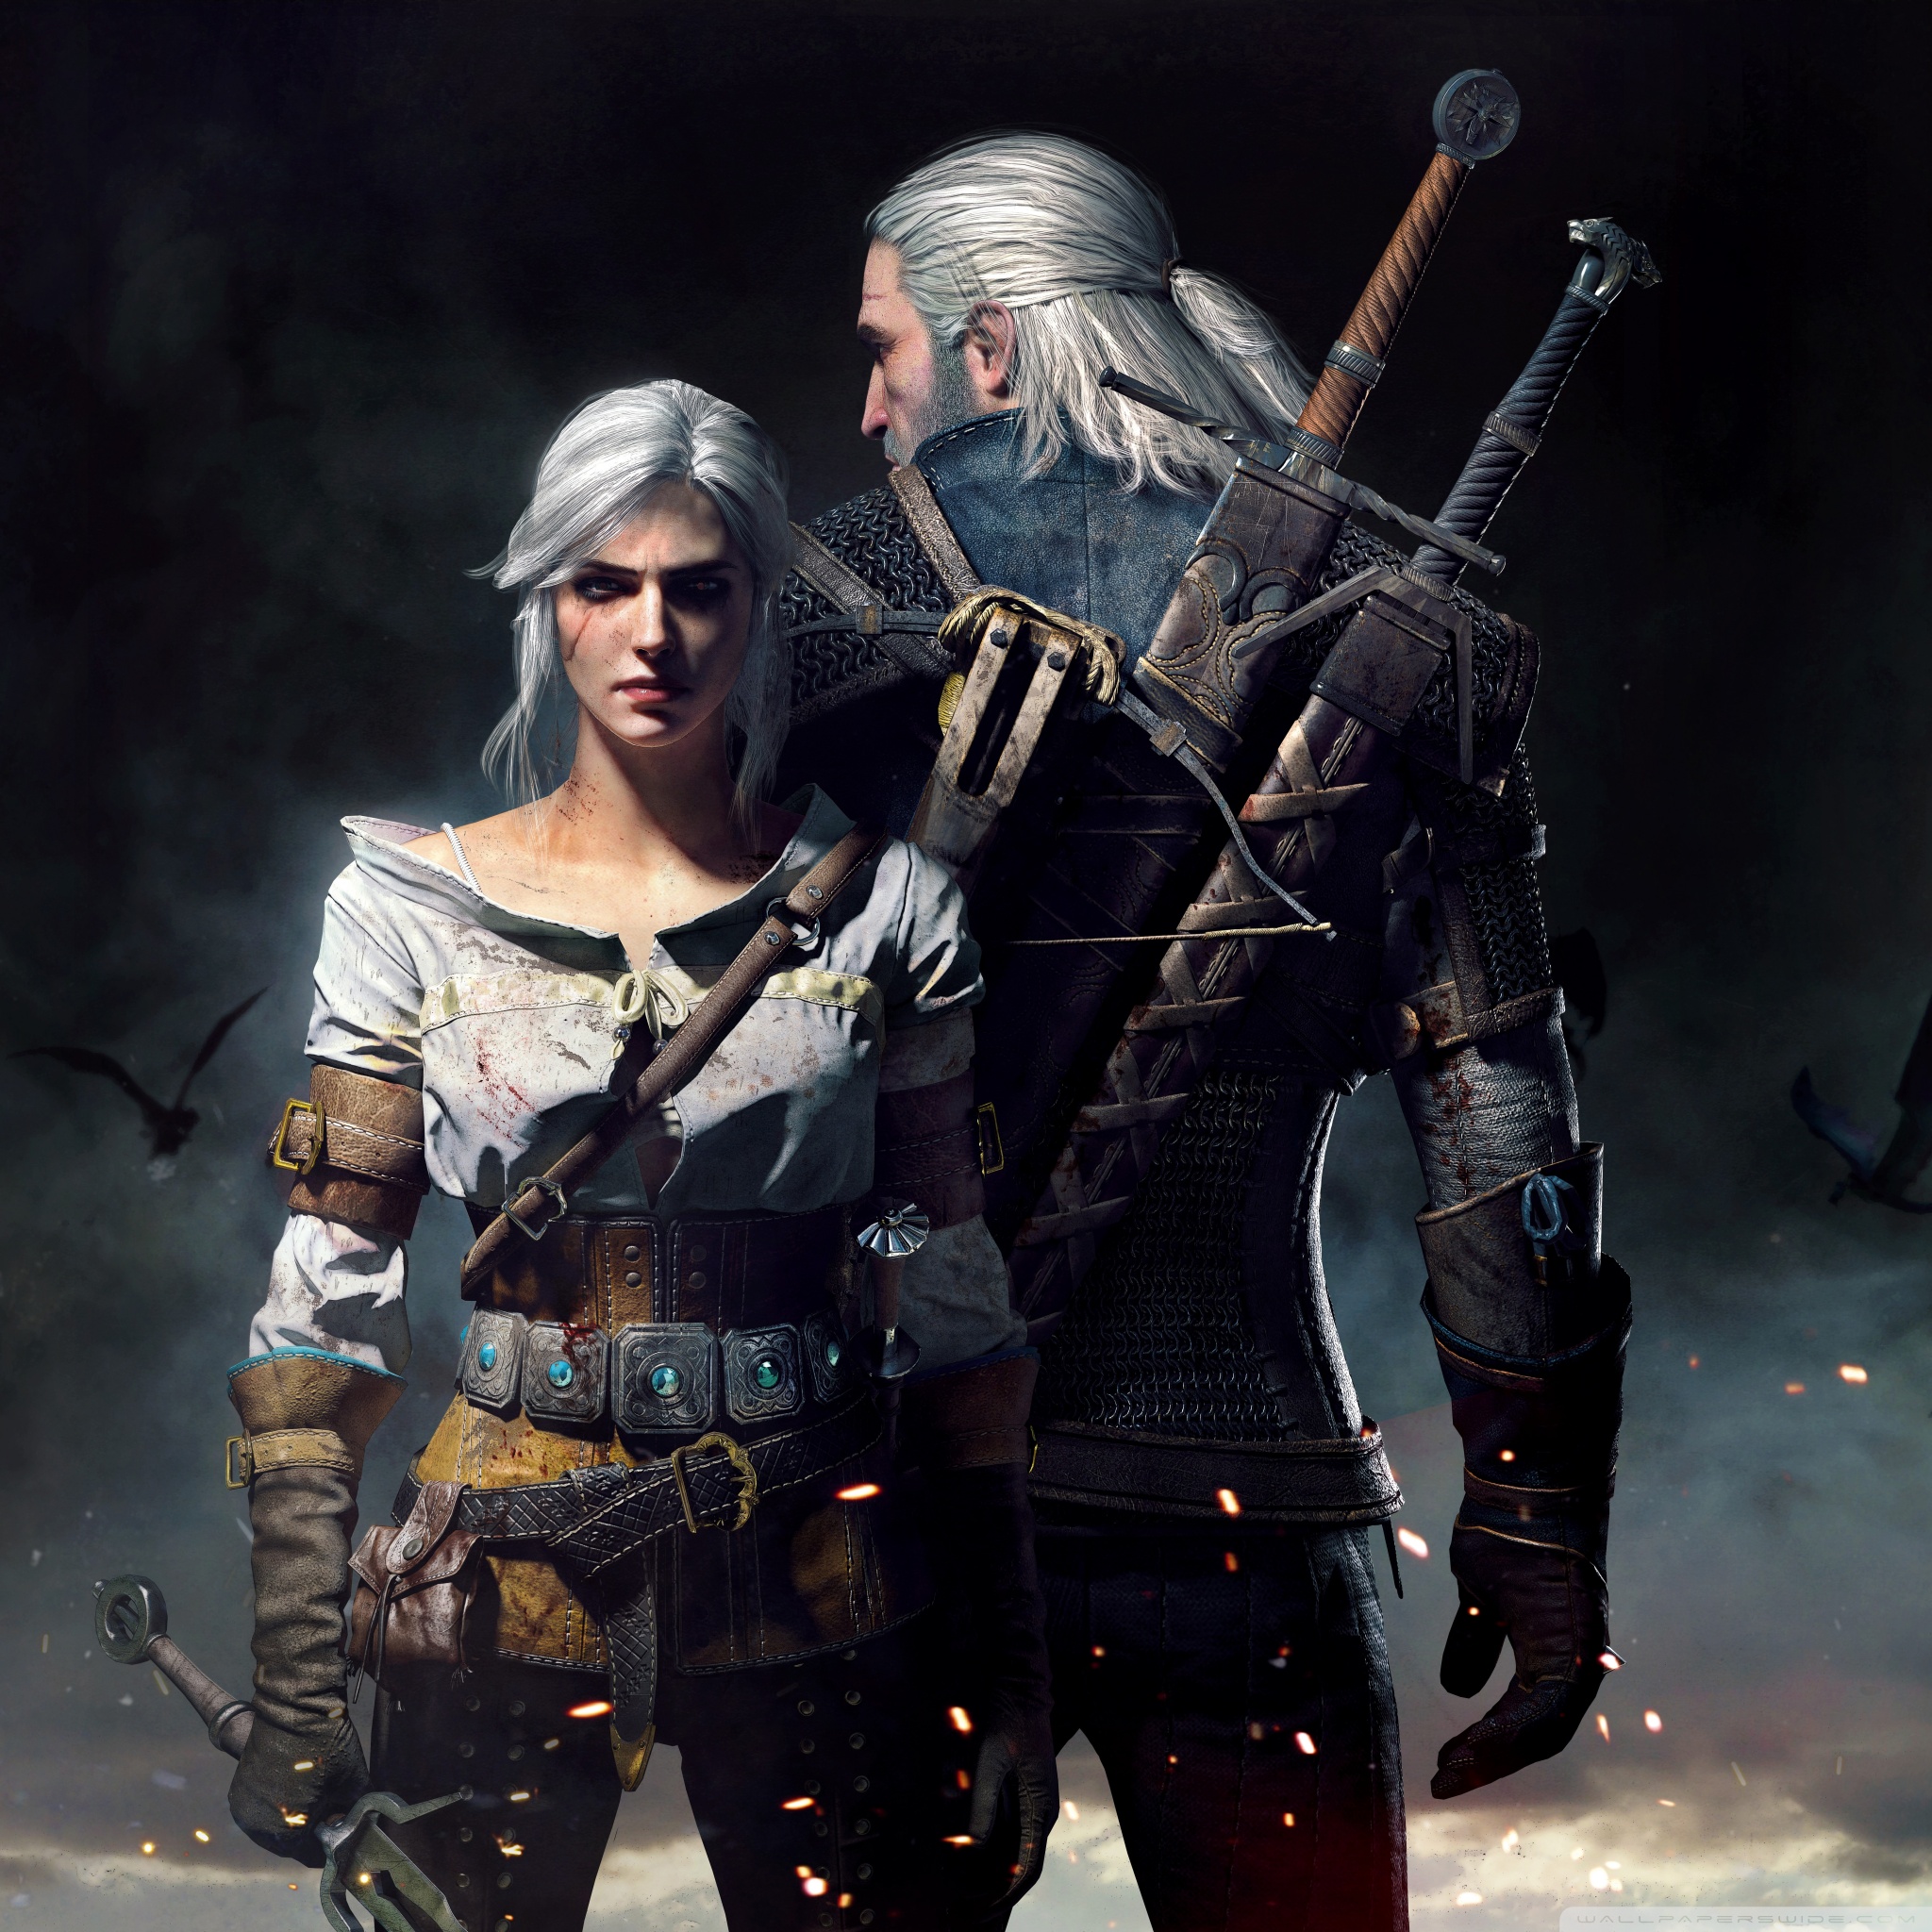 Witcher 1 Wallpapers